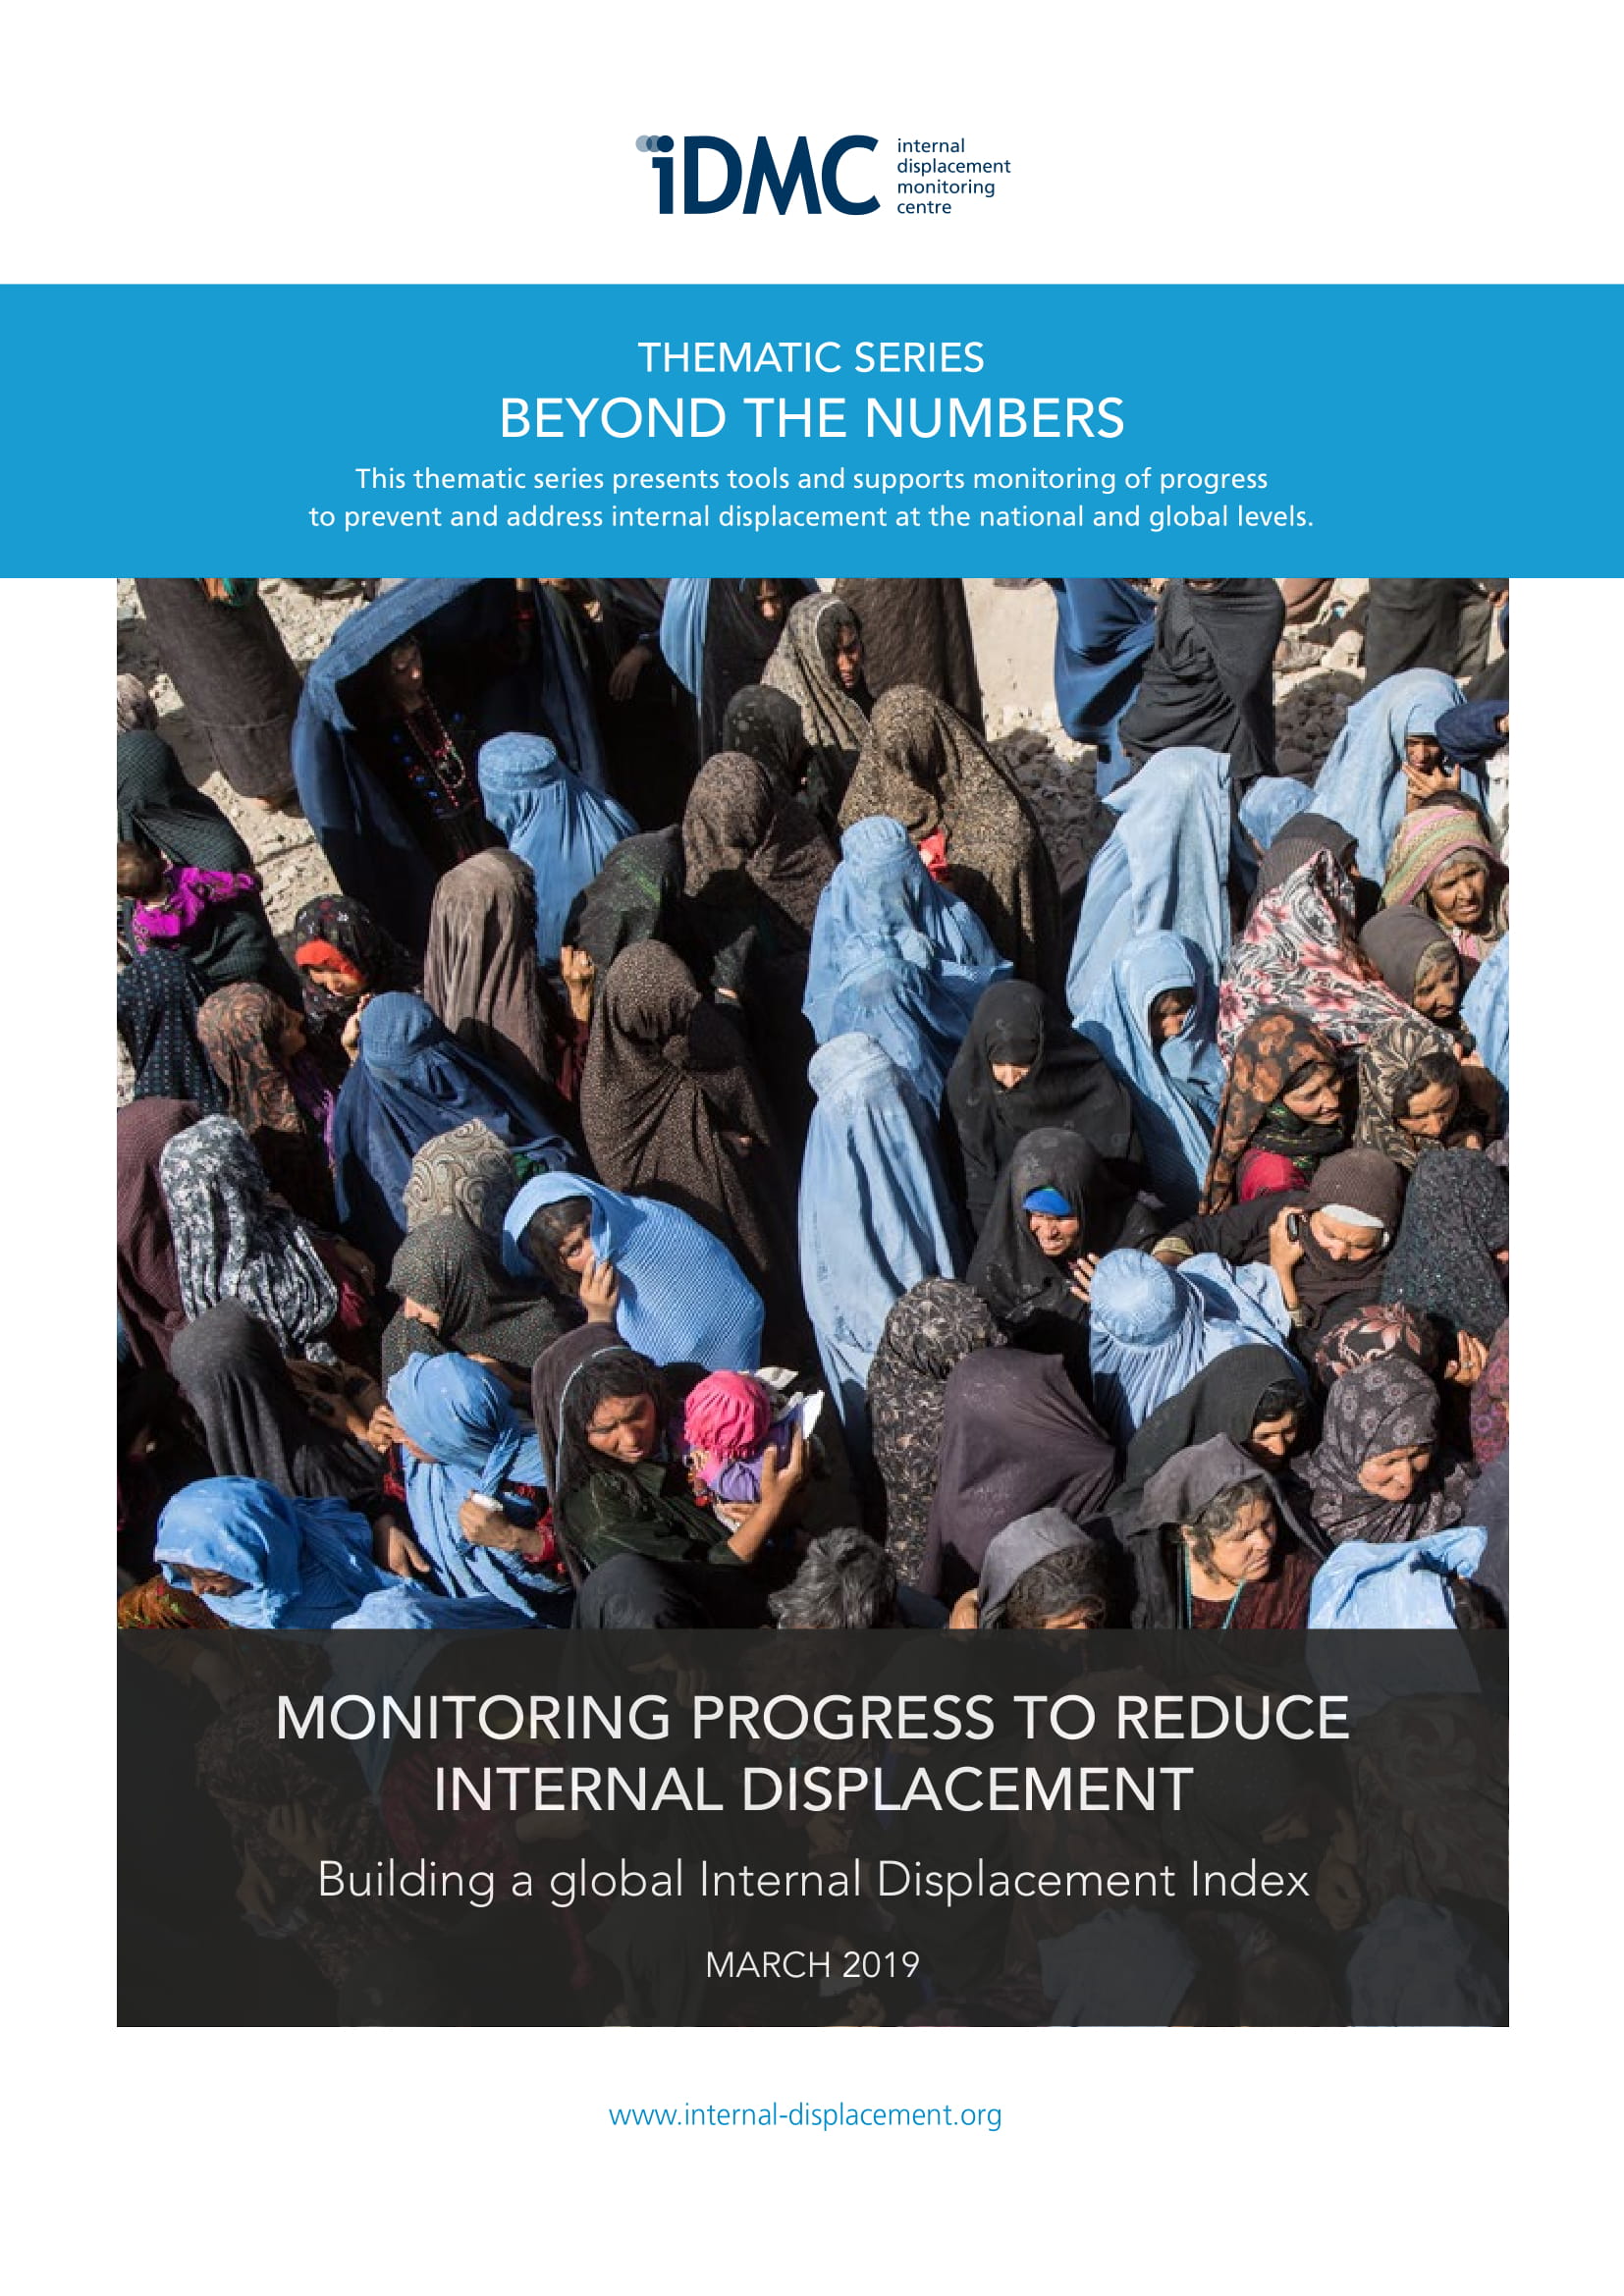 Beyond the numbers: monitoring progress to reduce internal displacement